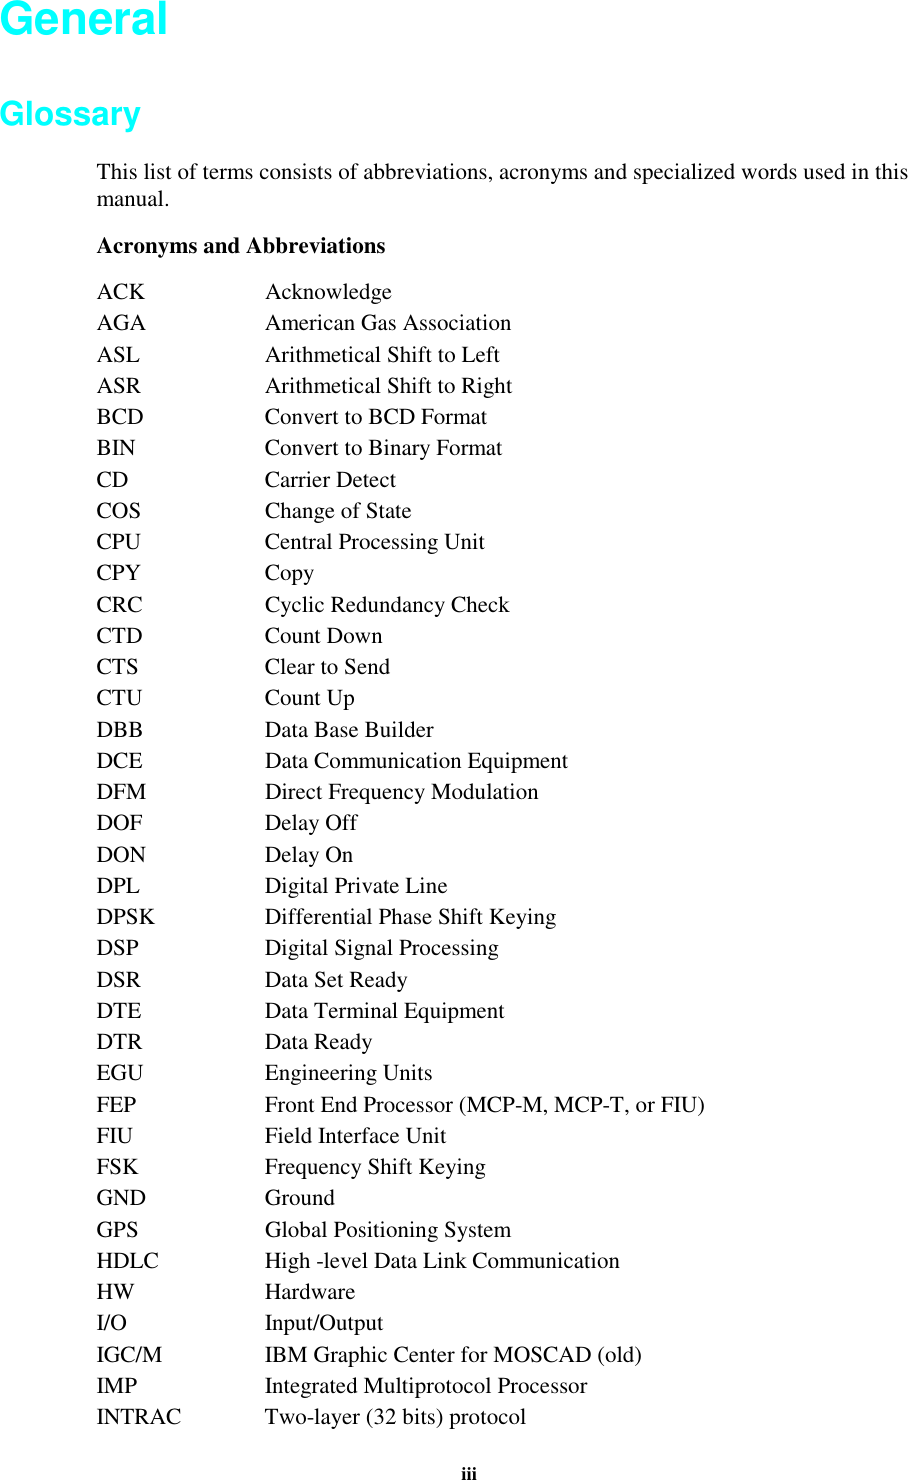 iiiGeneralGlossaryThis list of terms consists of abbreviations, acronyms and specialized words used in thismanual.Acronyms and AbbreviationsACK AcknowledgeAGA American Gas AssociationASL Arithmetical Shift to LeftASR Arithmetical Shift to RightBCD Convert to BCD FormatBIN Convert to Binary FormatCD Carrier DetectCOS Change of StateCPU Central Processing UnitCPY CopyCRC Cyclic Redundancy CheckCTD Count DownCTS Clear to SendCTU Count UpDBB Data Base BuilderDCE Data Communication EquipmentDFM Direct Frequency ModulationDOF Delay OffDON Delay OnDPL Digital Private LineDPSK Differential Phase Shift KeyingDSP Digital Signal ProcessingDSR Data Set ReadyDTE Data Terminal EquipmentDTR Data ReadyEGU Engineering UnitsFEP Front End Processor (MCP-M, MCP-T, or FIU)FIU Field Interface UnitFSK Frequency Shift KeyingGND GroundGPS Global Positioning SystemHDLC High -level Data Link CommunicationHW HardwareI/O Input/OutputIGC/M IBM Graphic Center for MOSCAD (old)IMP Integrated Multiprotocol ProcessorINTRAC Two-layer (32 bits) protocol